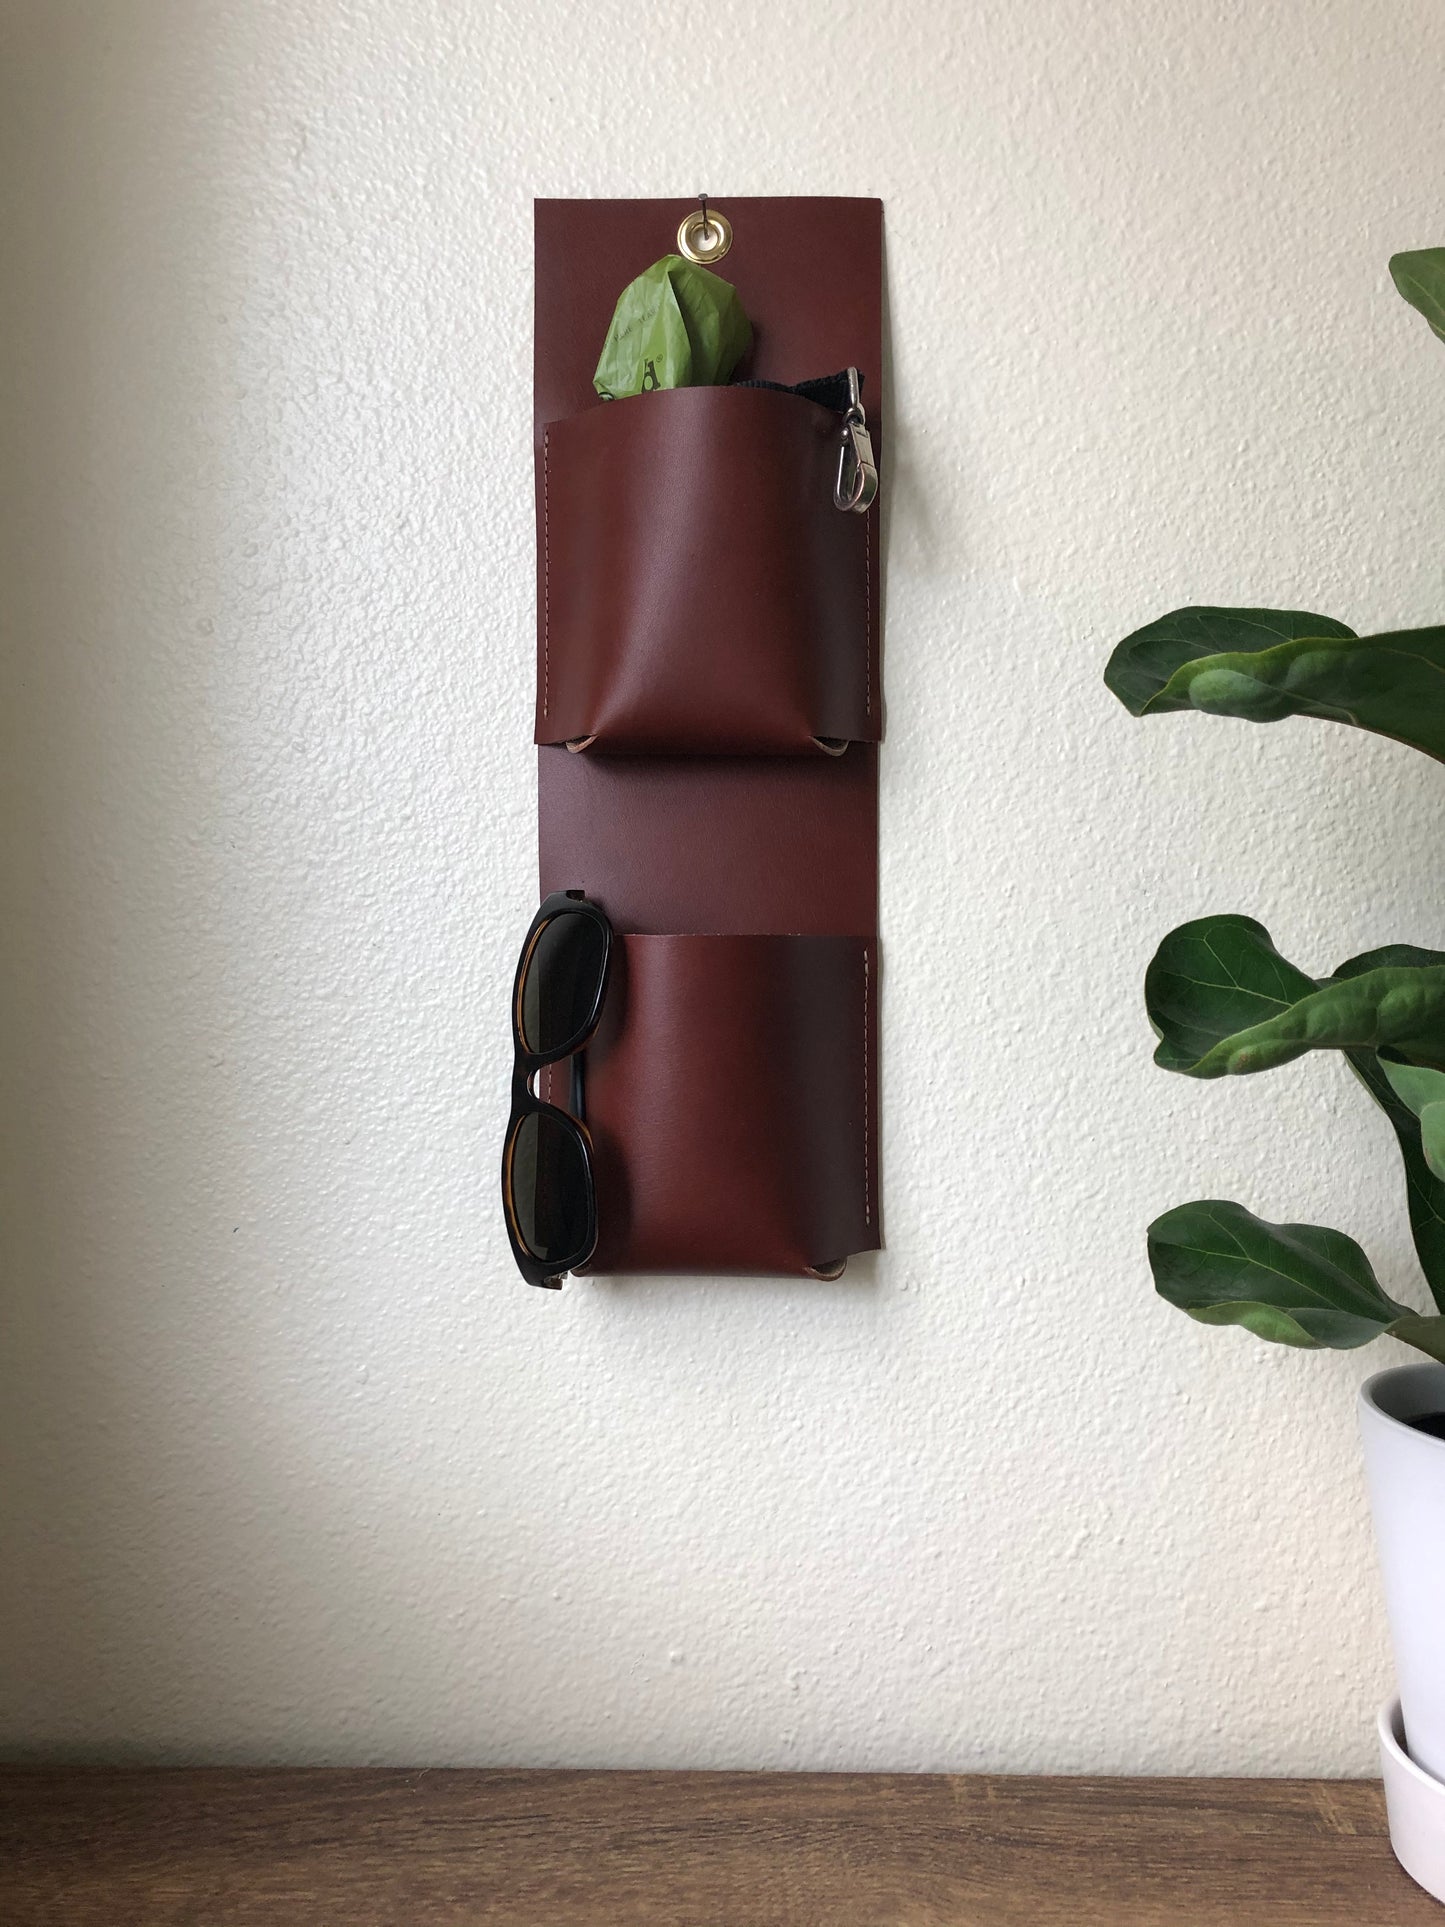 Rich leather wall pockets hold sunglasses and dog leash and bags stylishly.